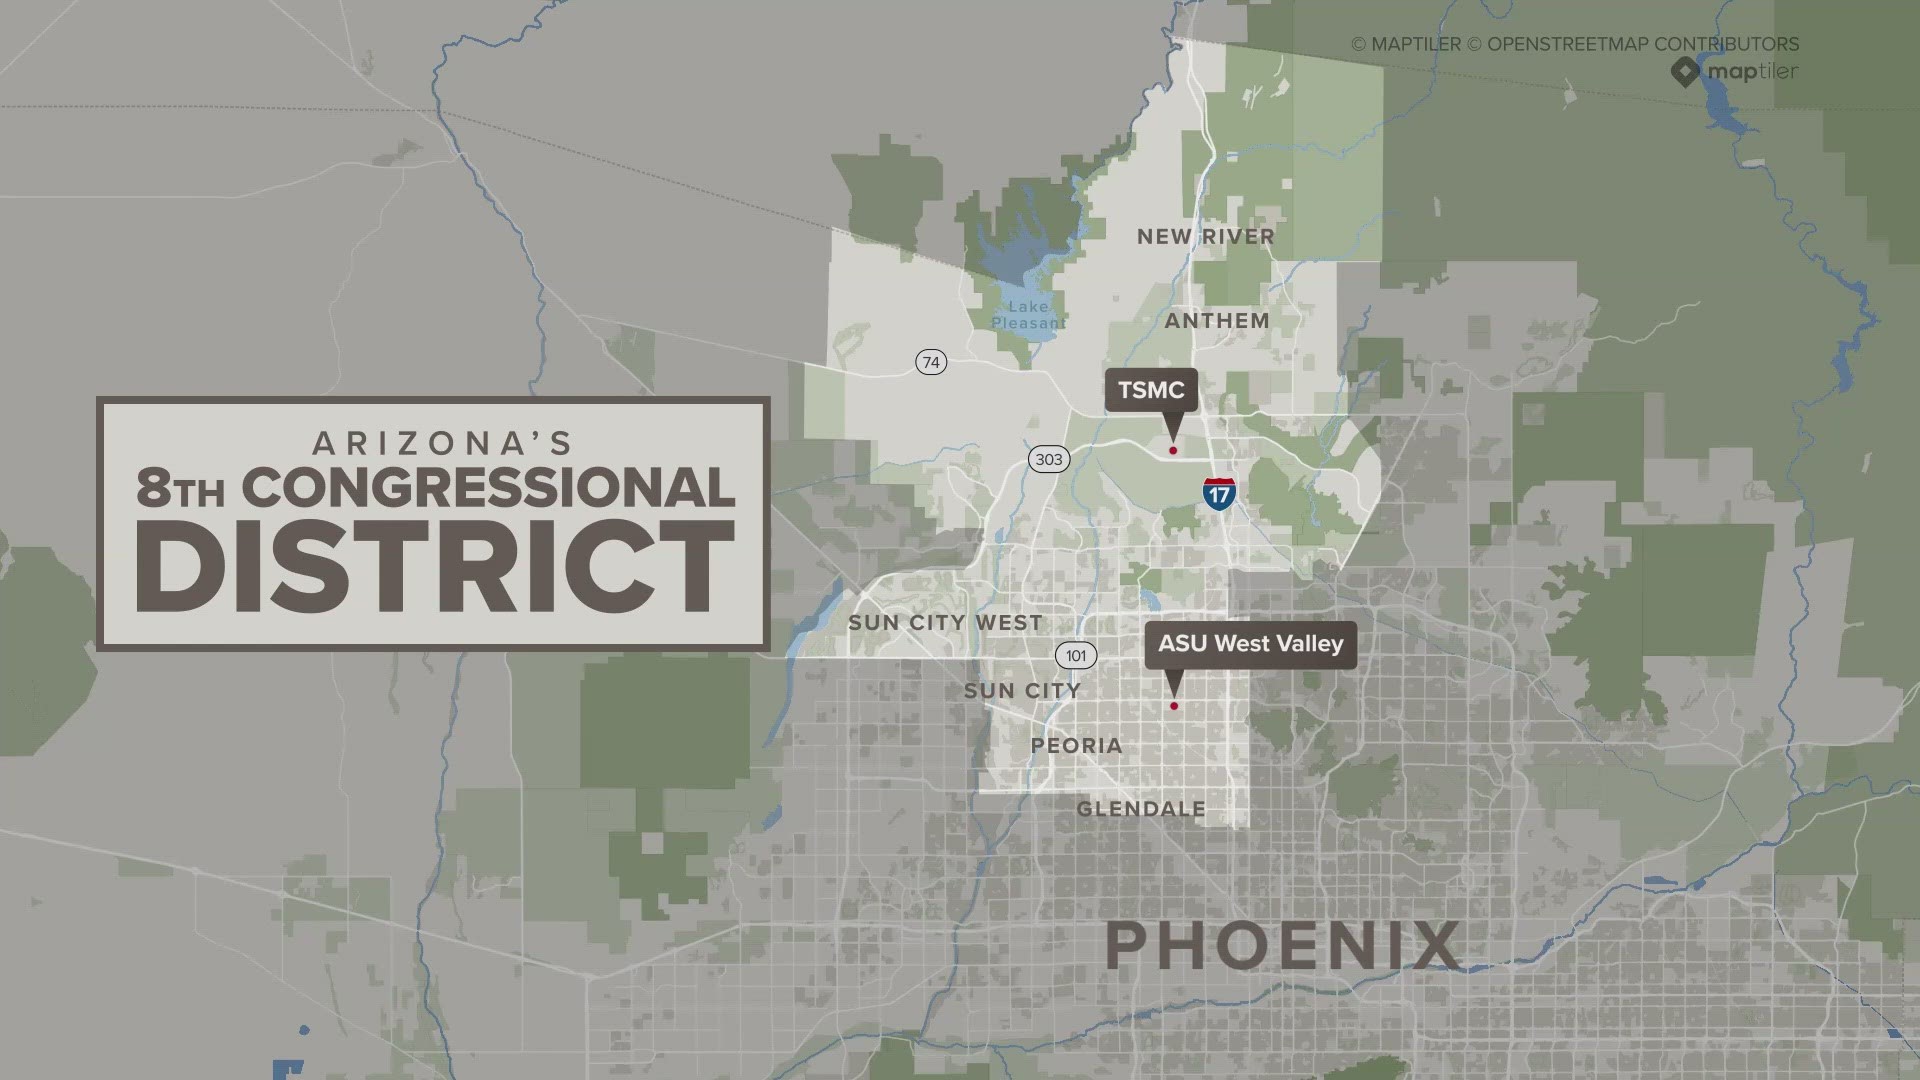 The 8th congressional district stretches from cities such as Phoenix, Peoria, Glendale, and Sun City. The district is seeing major growth in the manufacturing sector